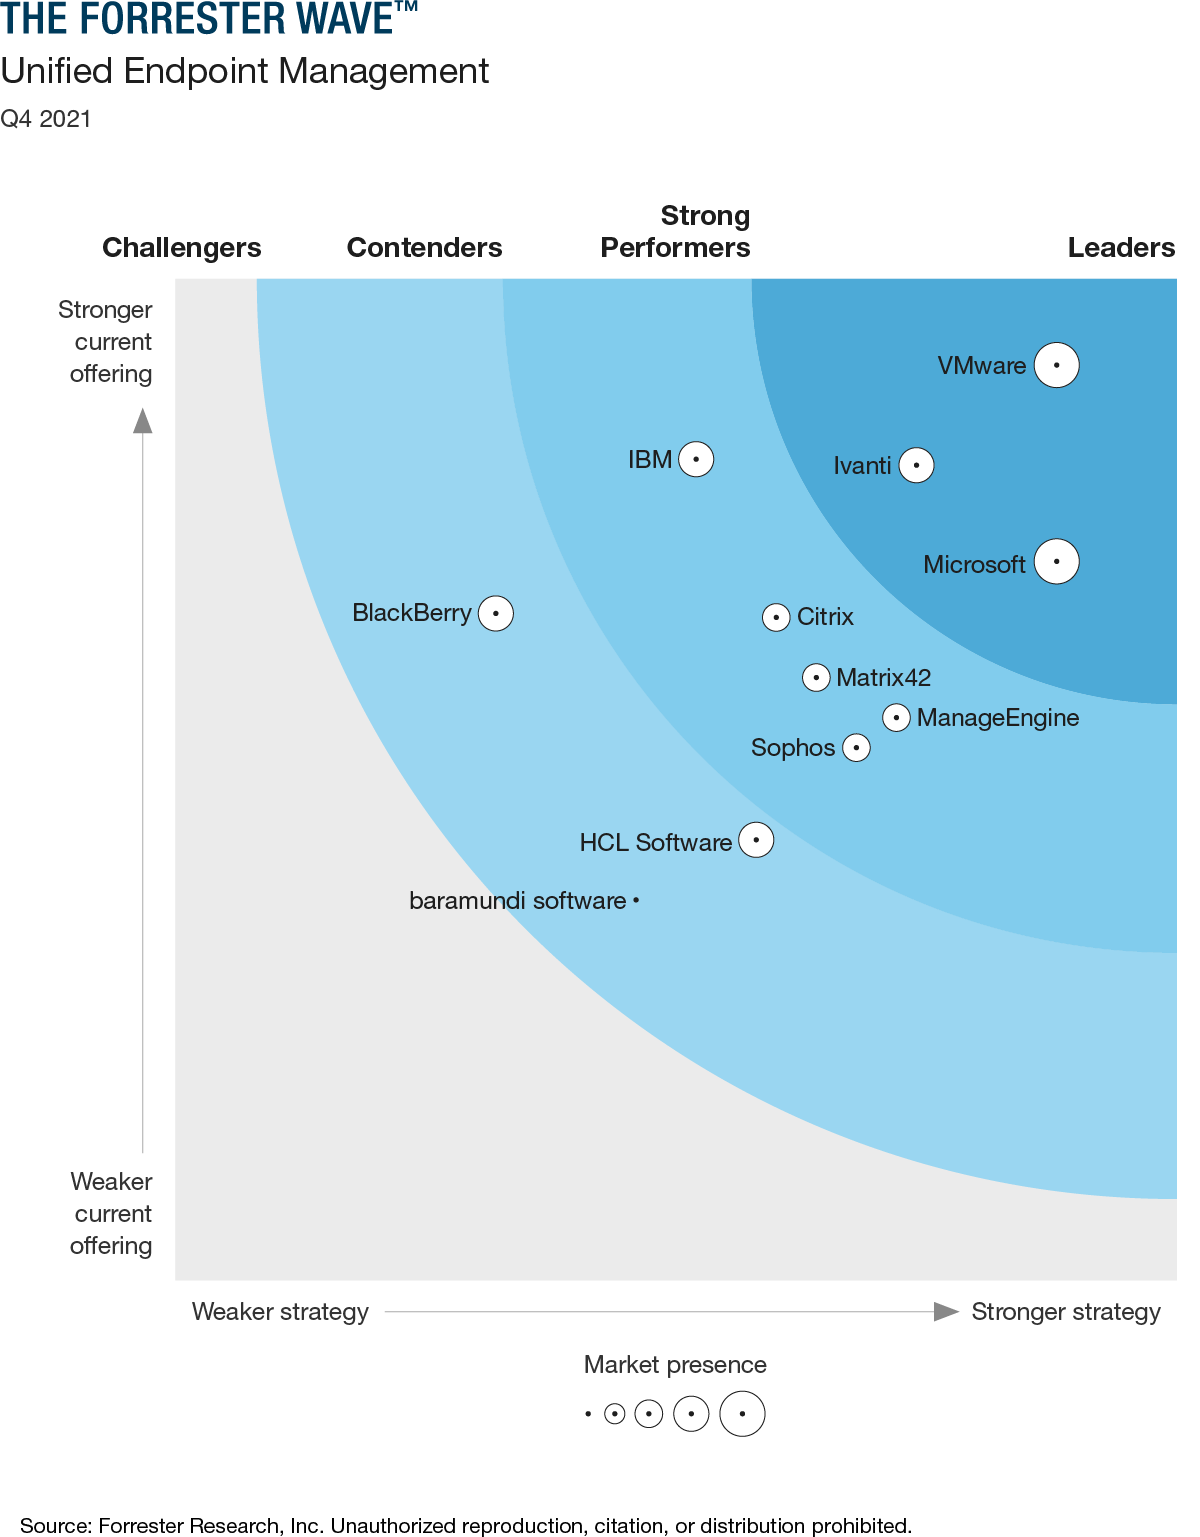 The Forrester Wave Unified Endpoint Management (UEM), Q4 2021 graphic positioning Microsoft near the top right hand corner under the Leaders position.